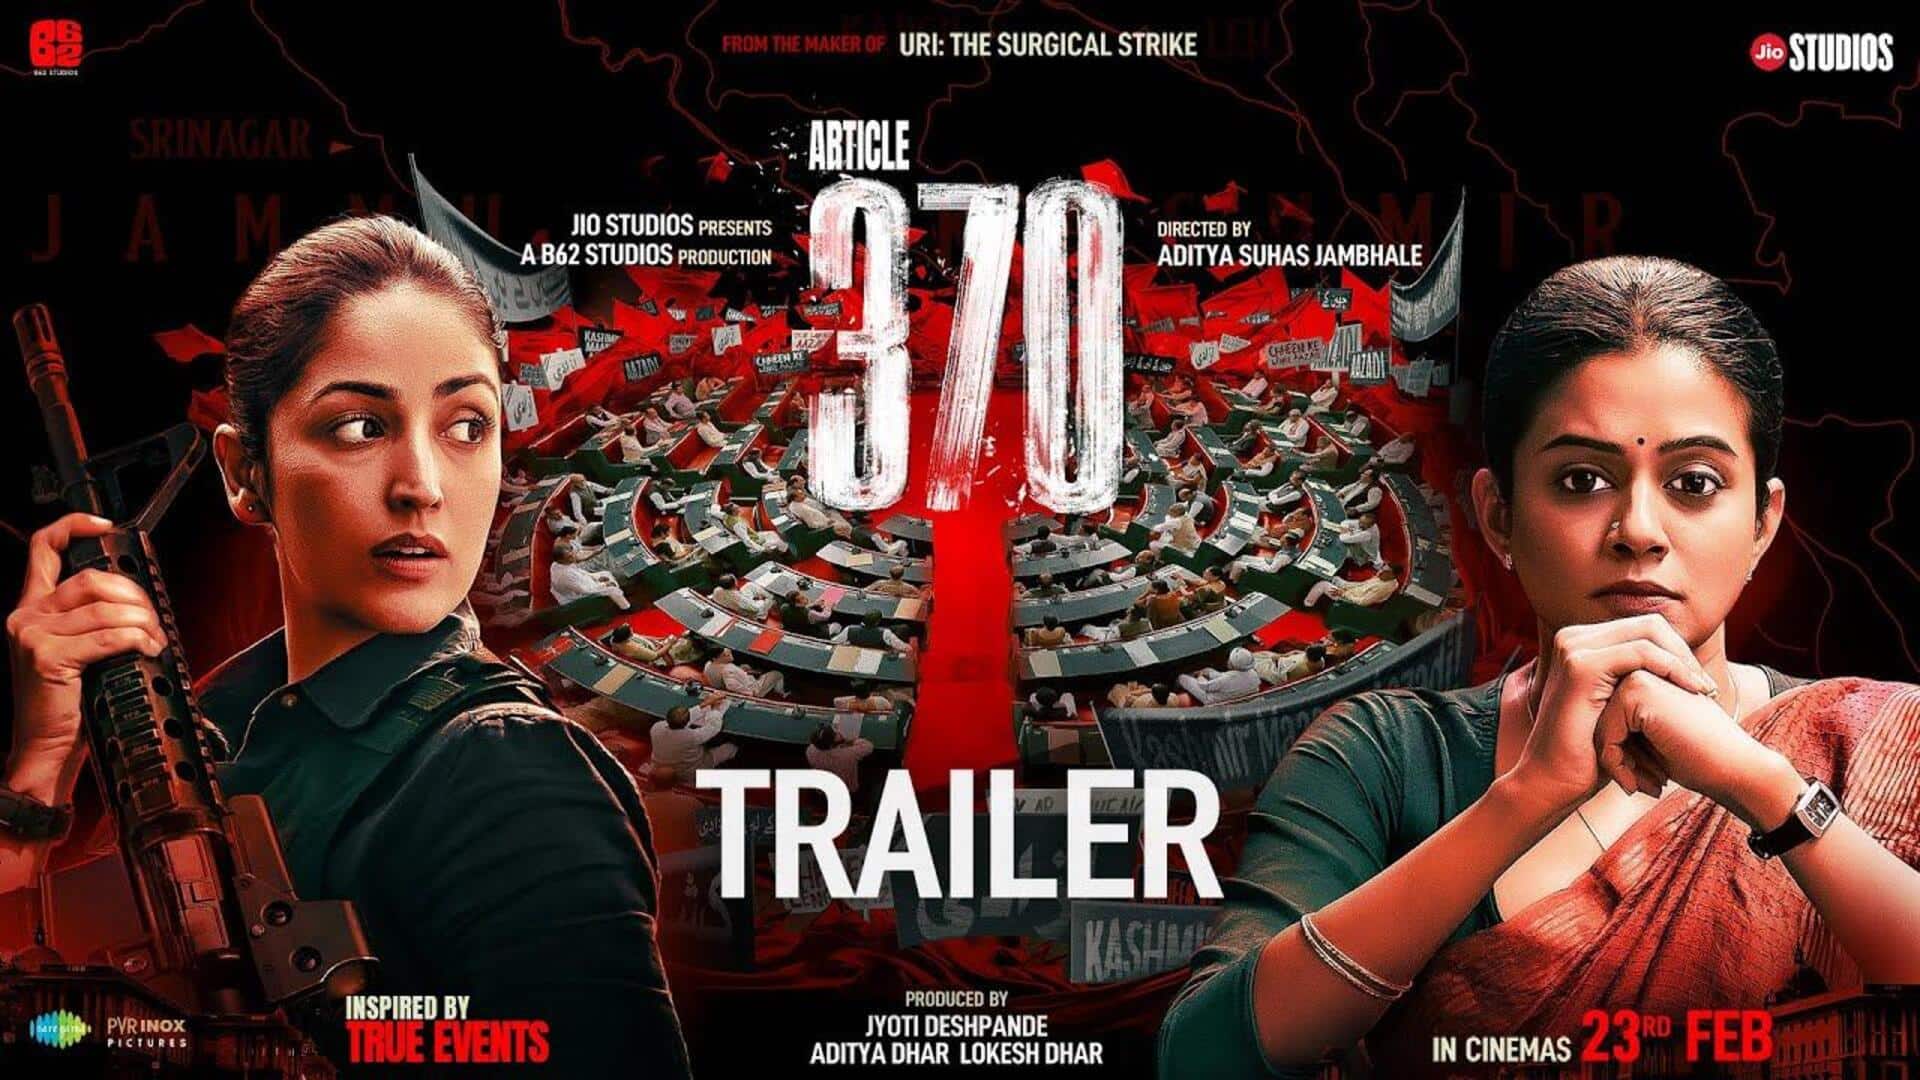 Box office collection: 'Article 370' maintains supremacy on fourth weekend